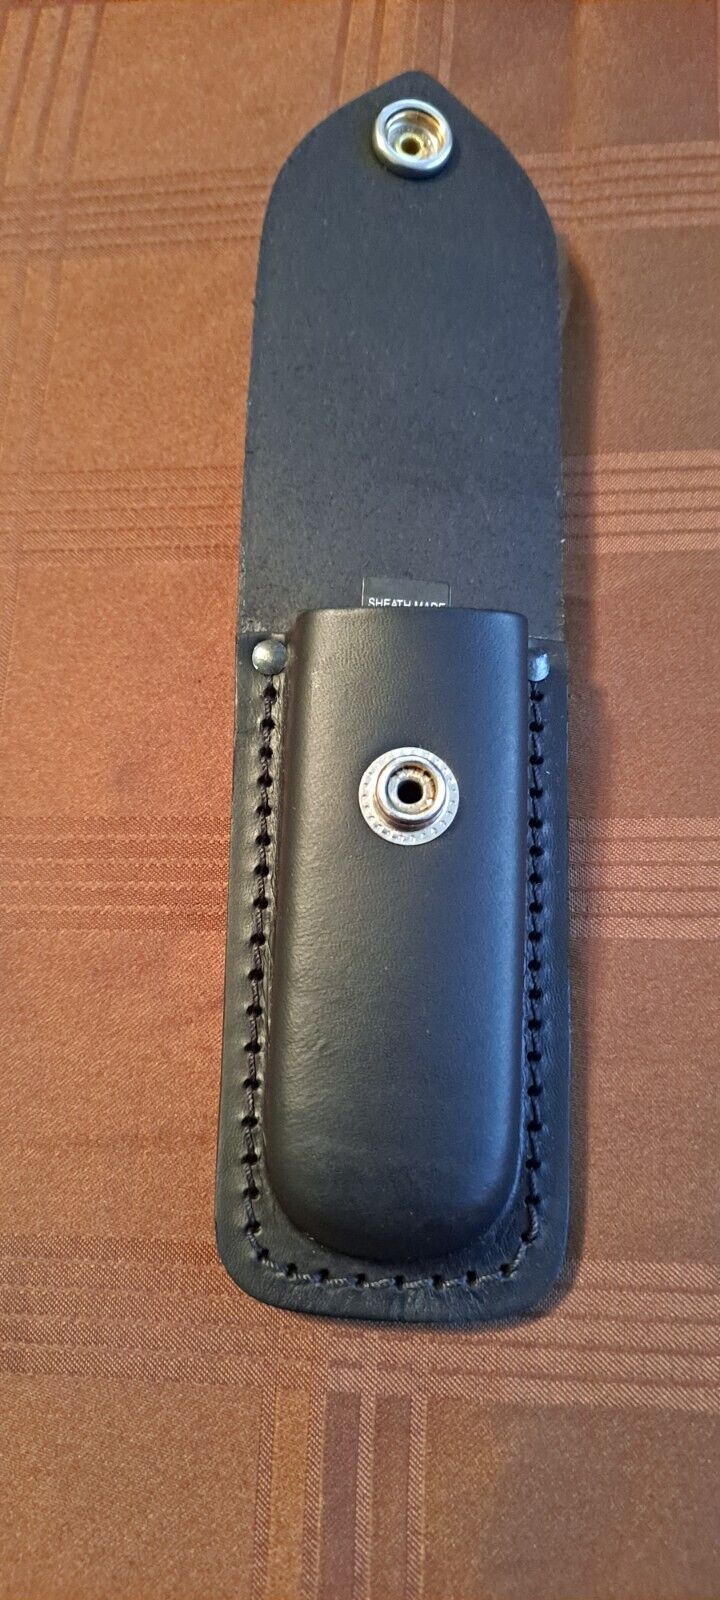 Buck 500 Duke Sheath New Never Used Ships Out Same Business Day